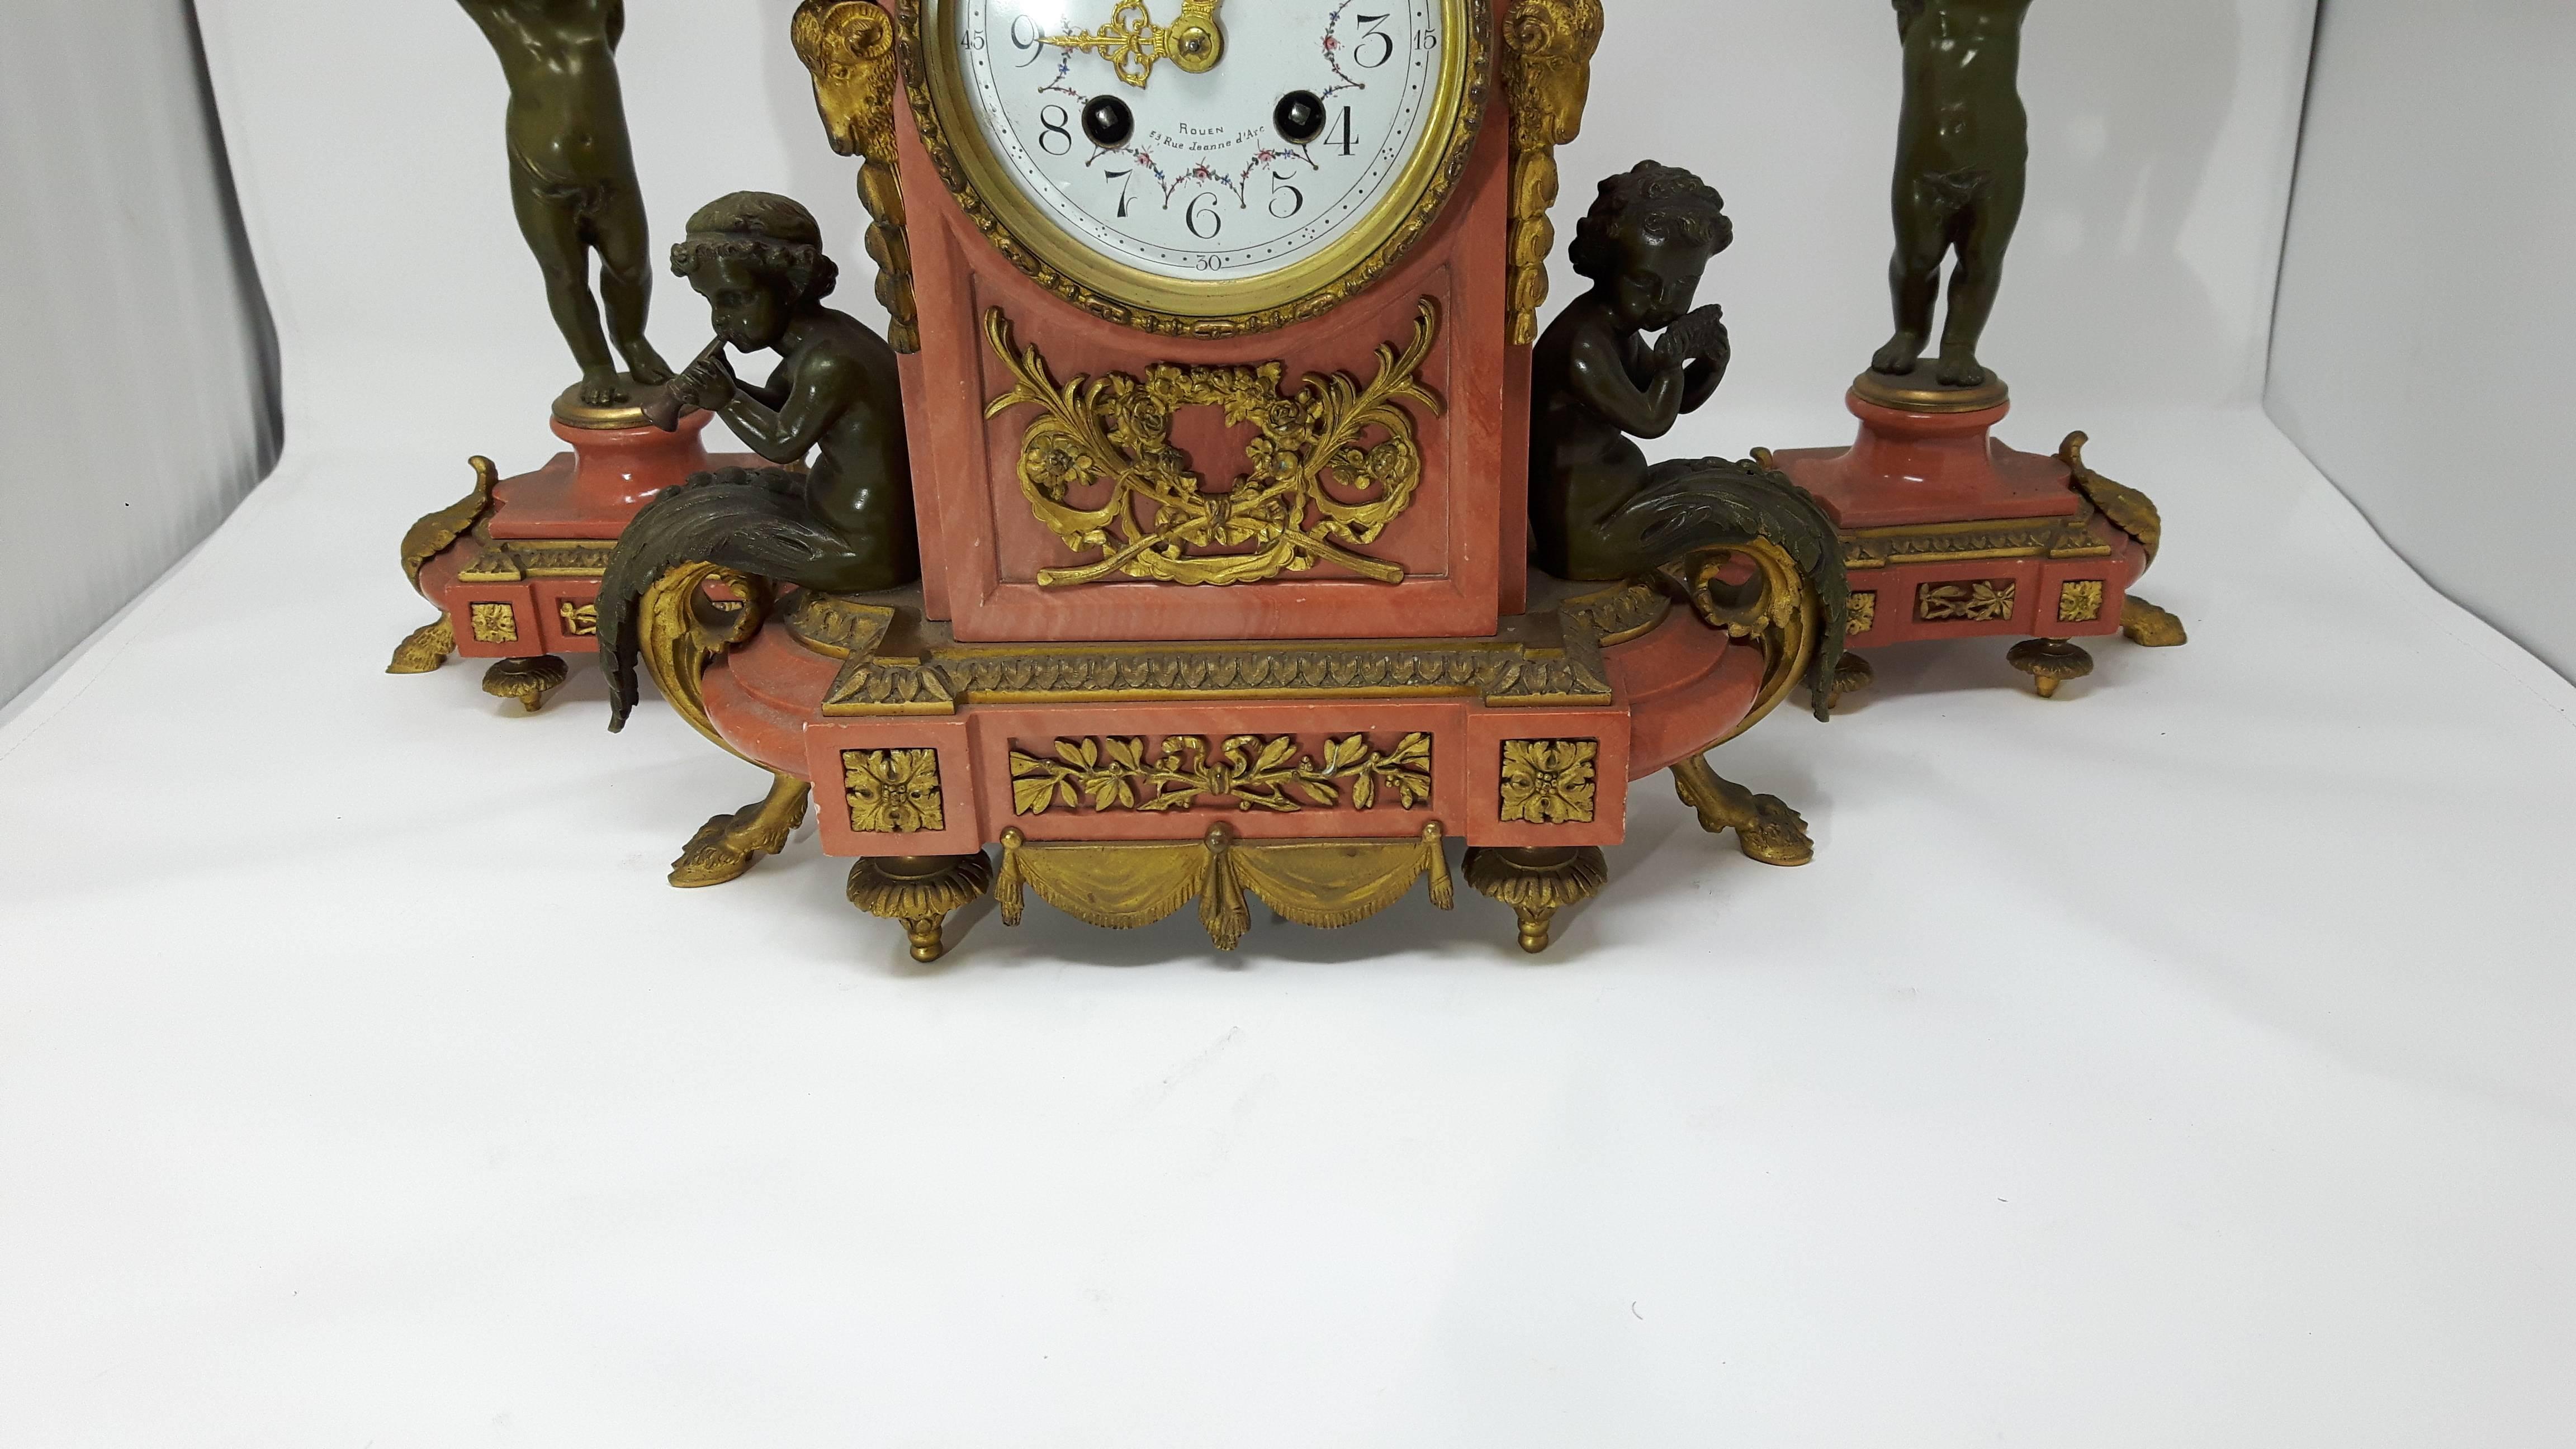 A fine quality three-piece French gilt red marble and bronze clock set comprising
two three branch candelabra and a mantel clock.
The clock has a white enamel and floral offset by ormolu mounts.